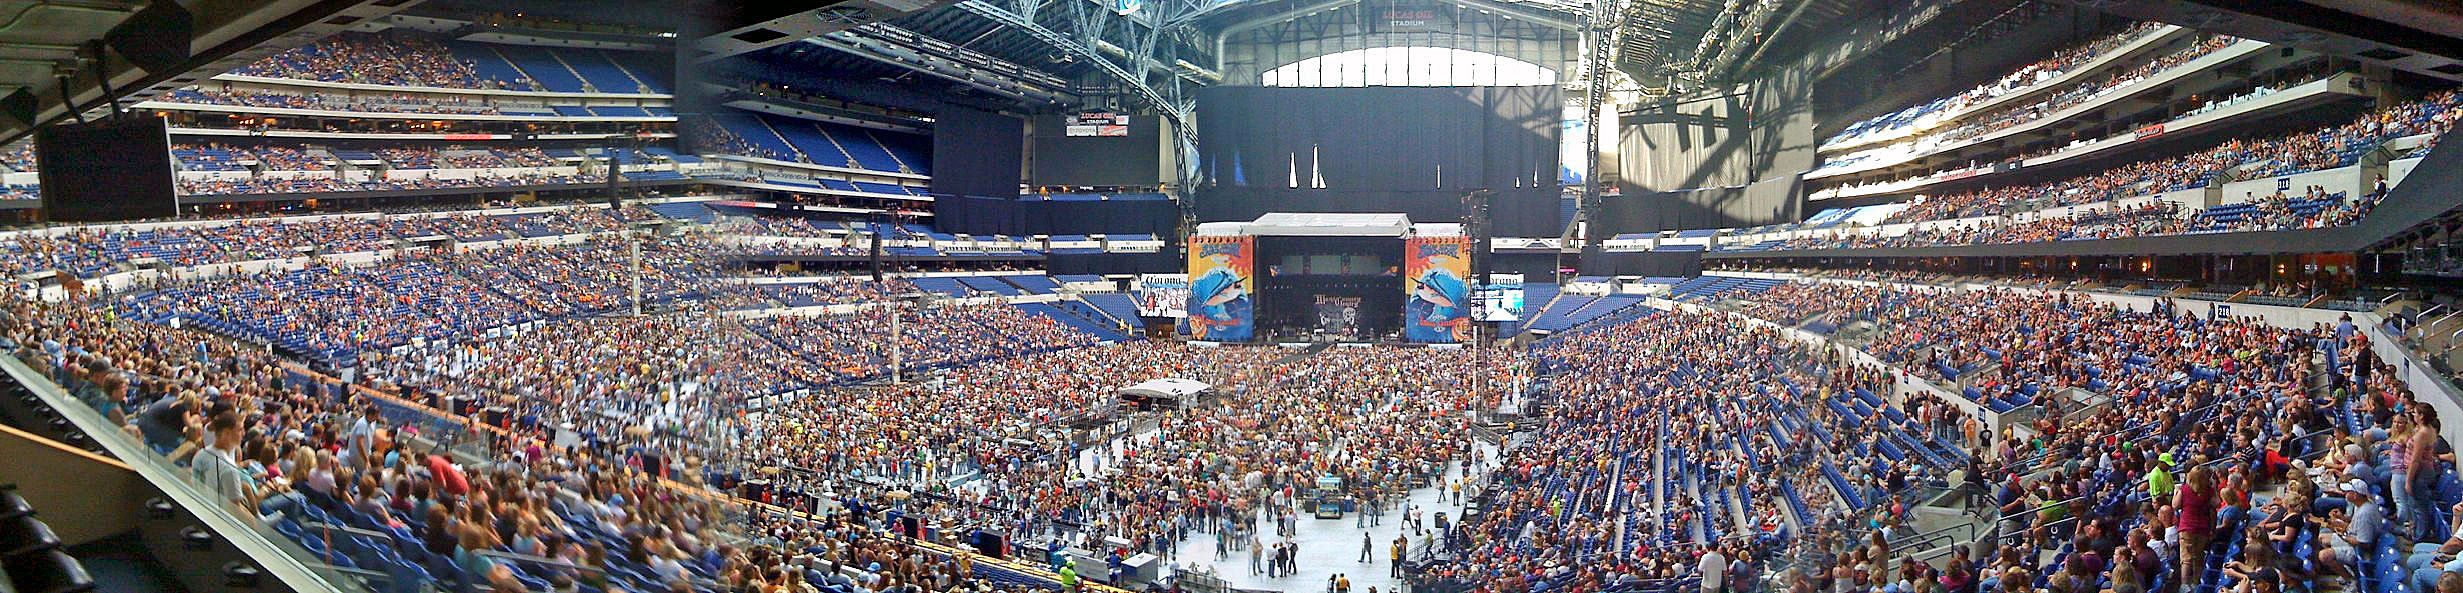 Crowds waiting for Kenny Chesney's performance. Photo by Zigger_Dog from Wikimedia.